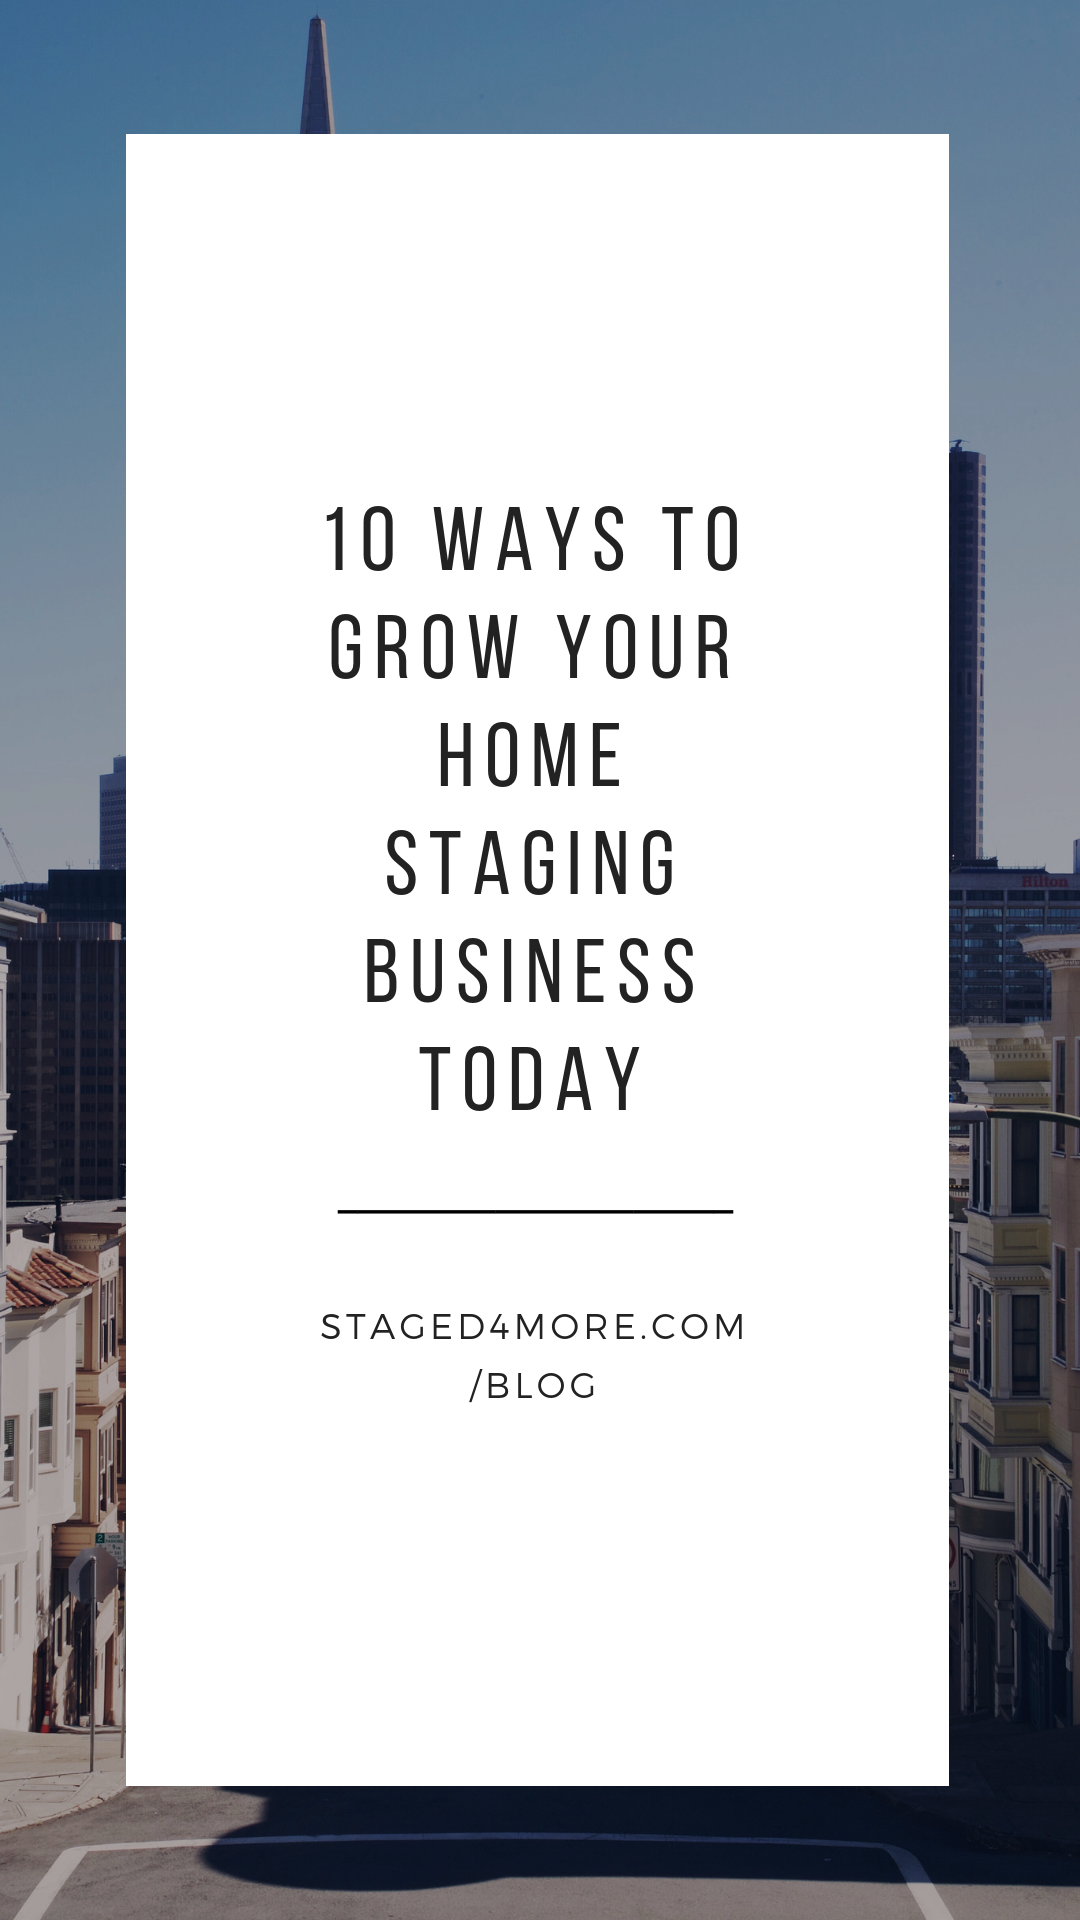 10+Ways+to+Grow+Your+Home+Staging+Business+Today+_+Staged4more+School+of+Home+Staging.png